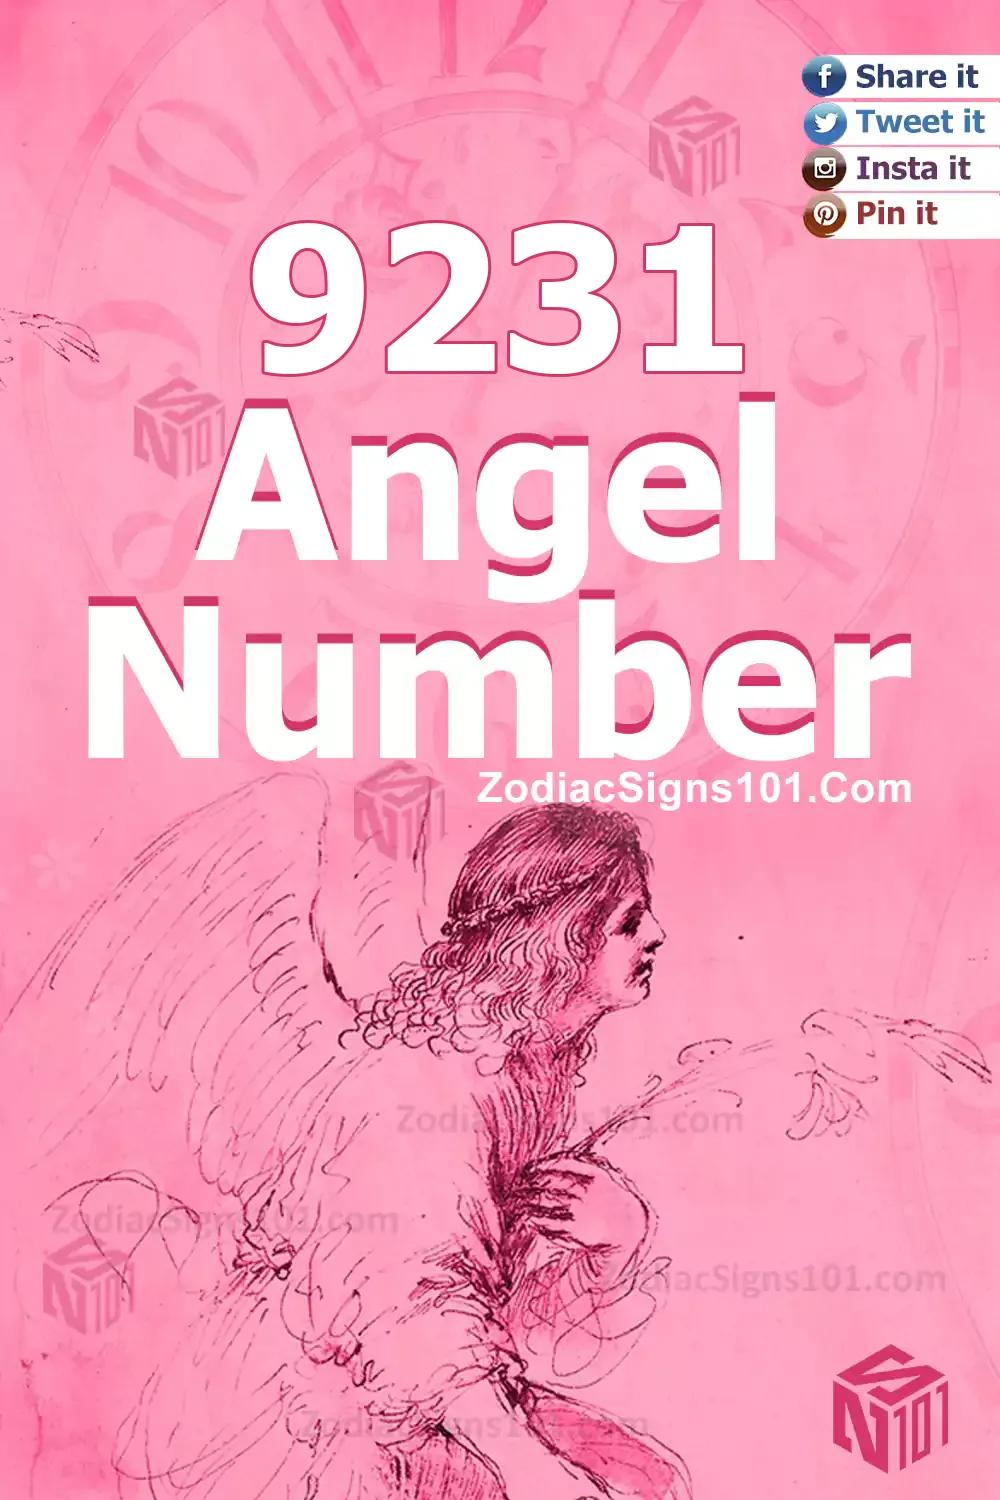 9231 Angel Number Meaning